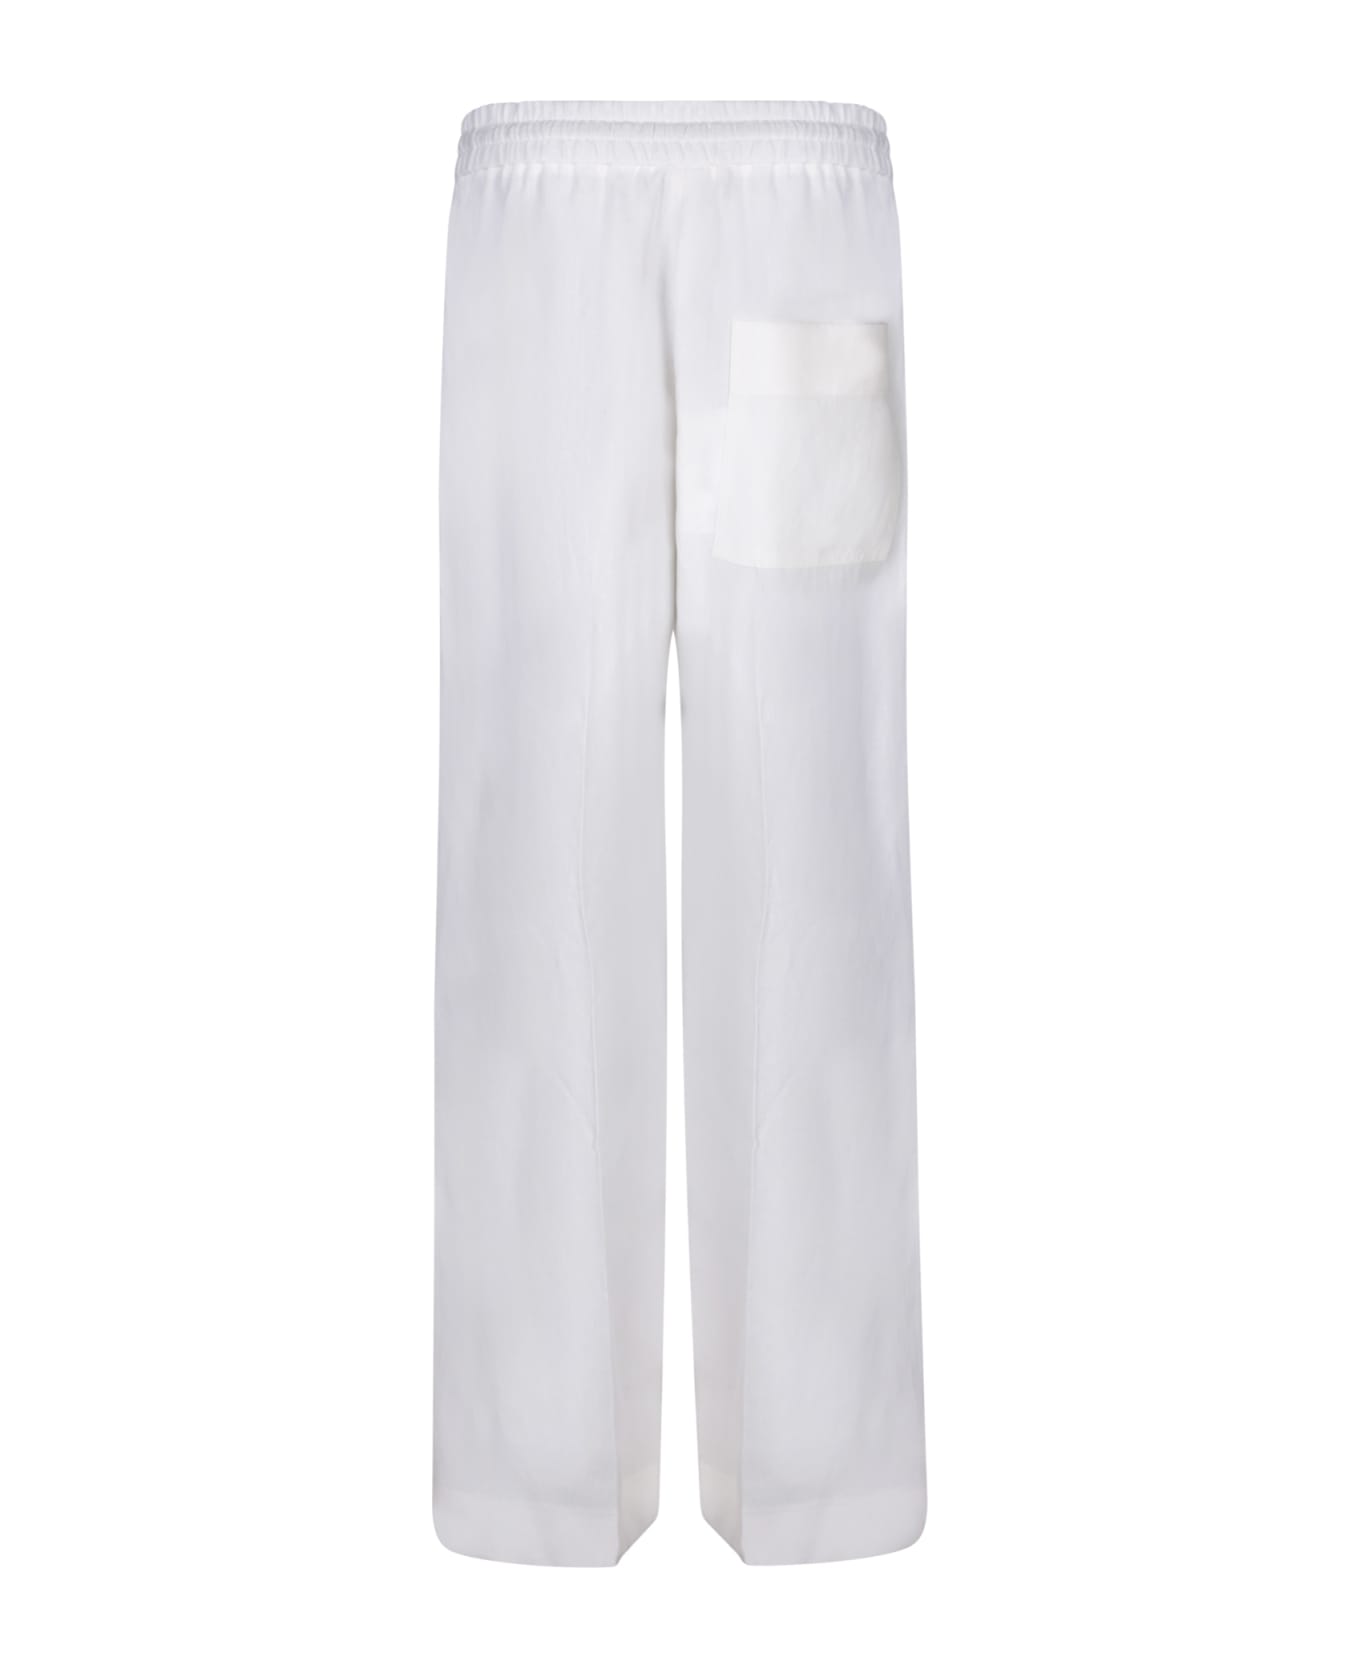 Paul Smith Wide-fit Cream Trousers - White ボトムス